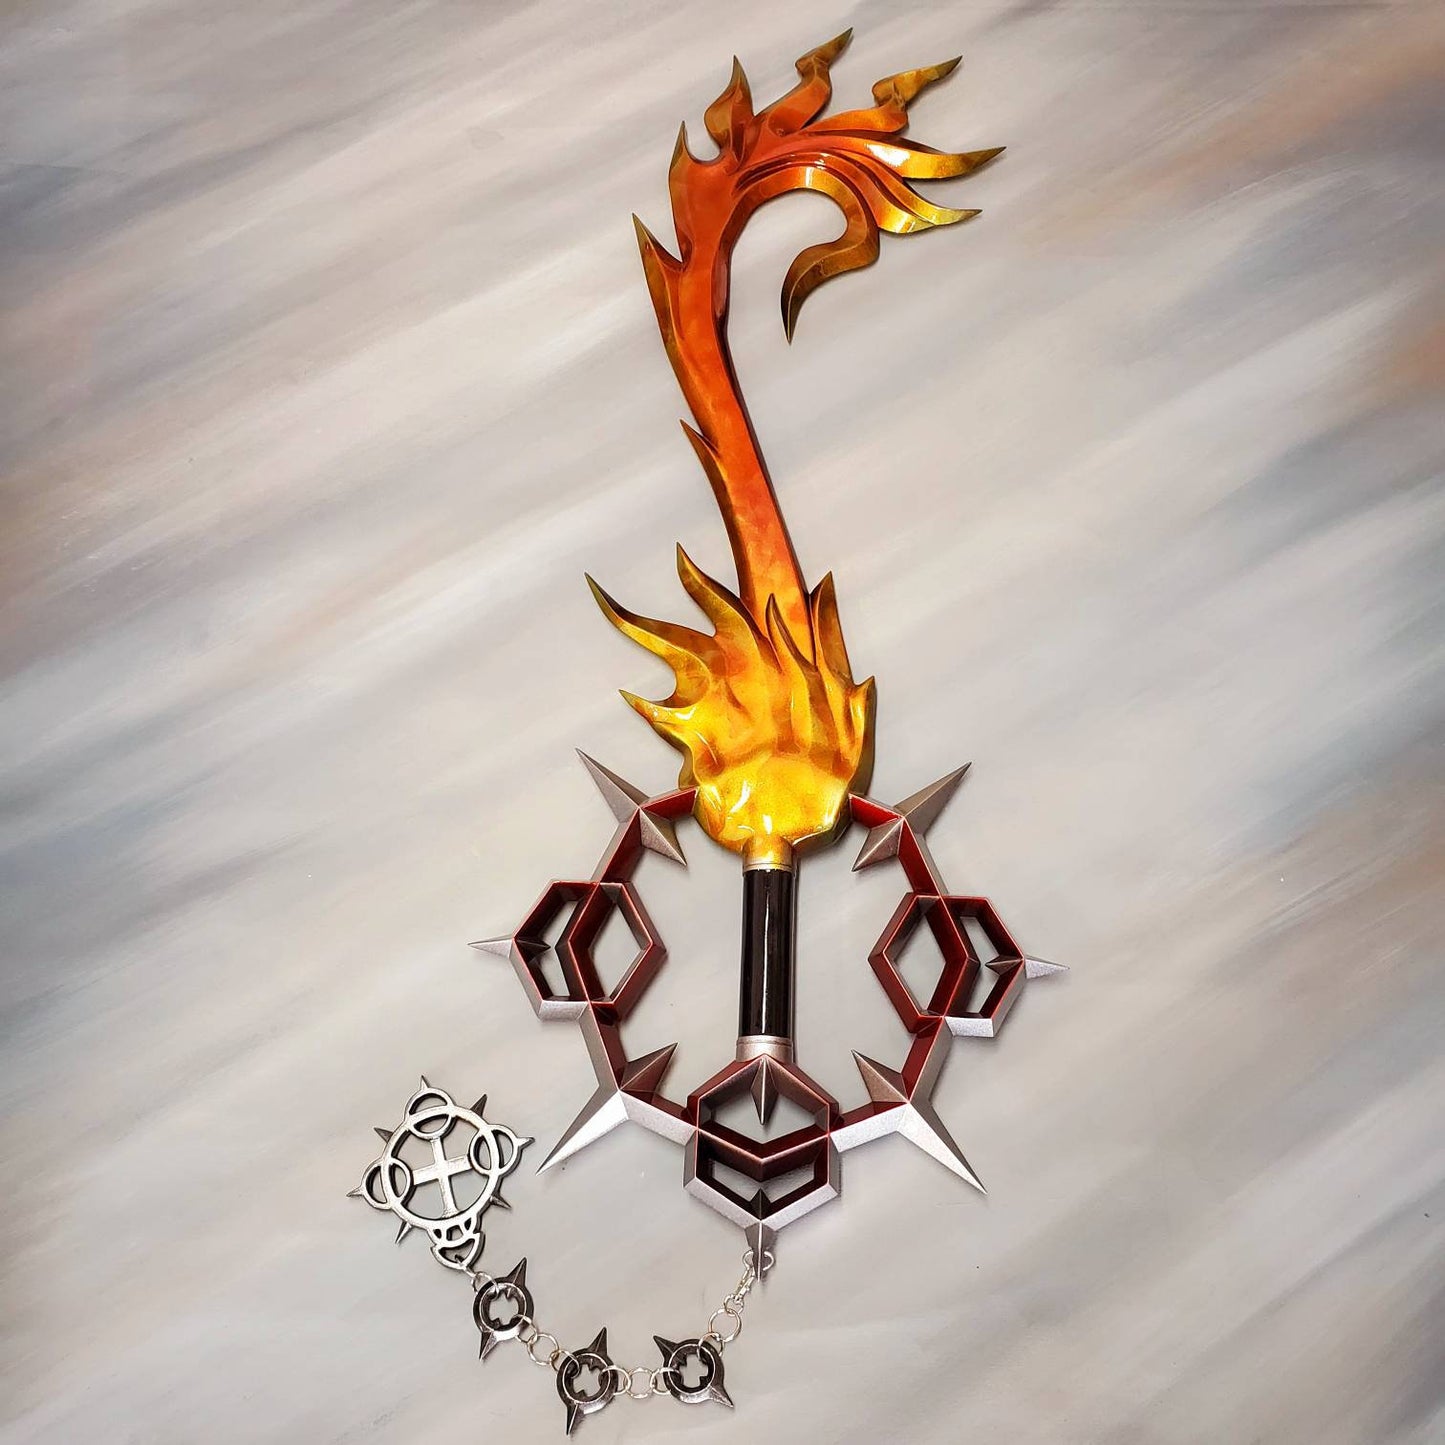 Axel's Flame Liberator Keyblade - Finished cosplay prop.